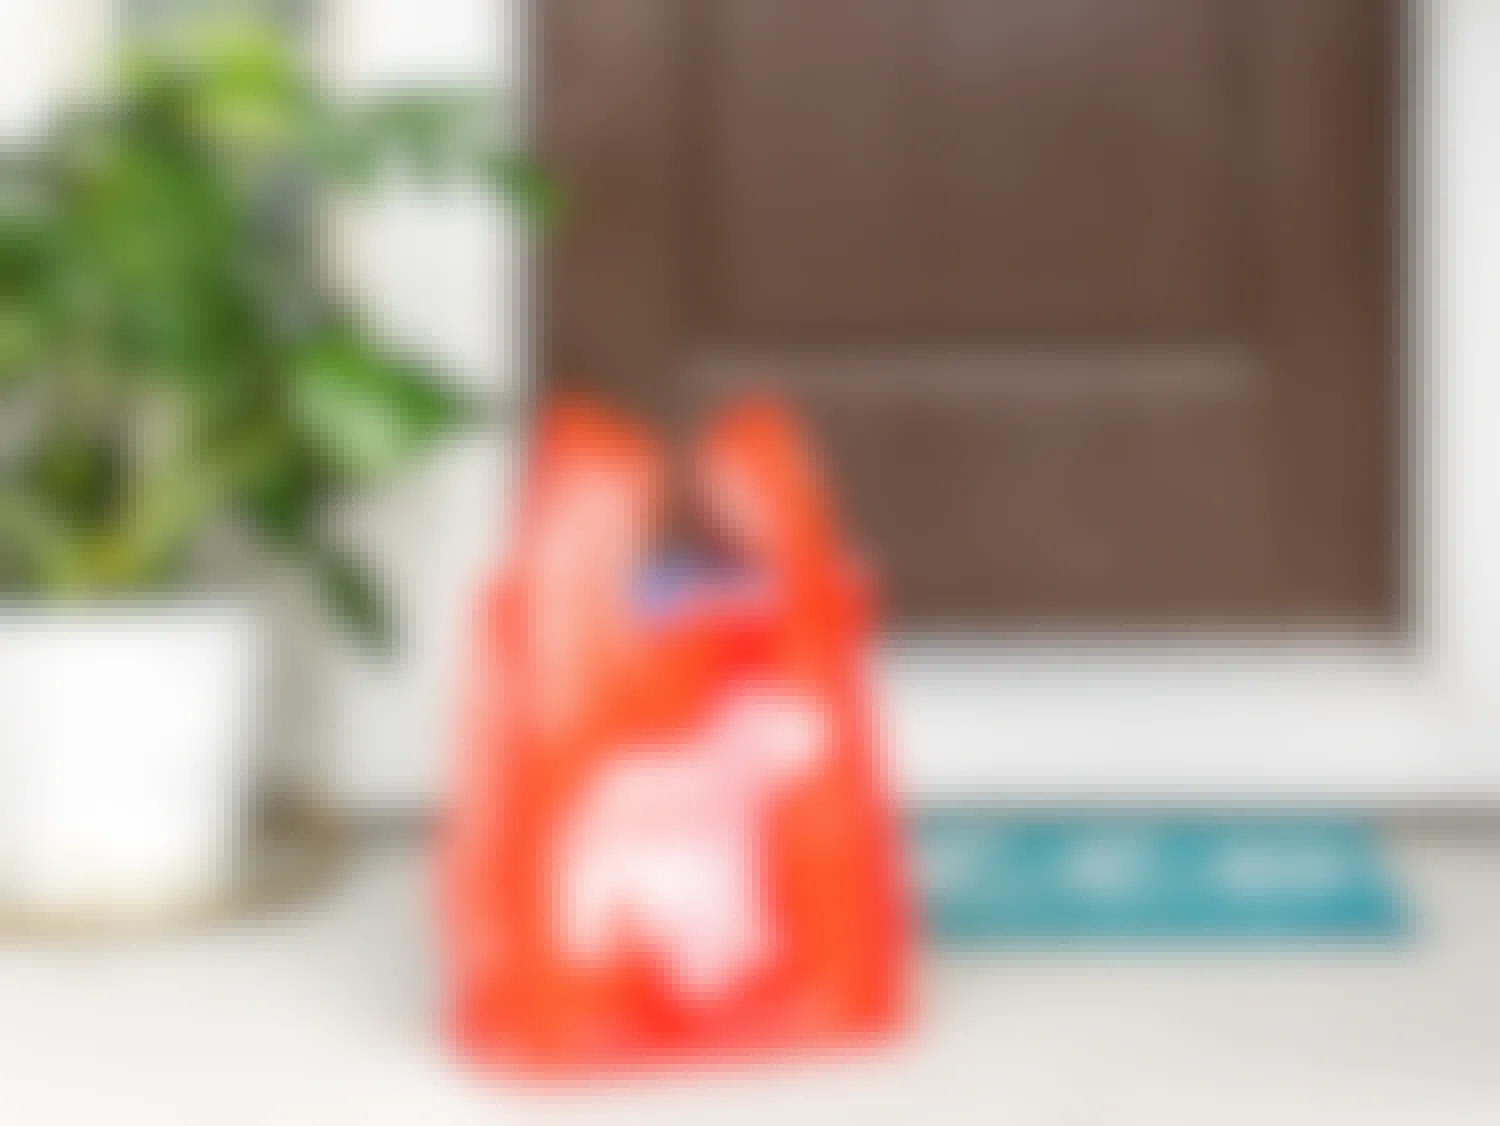 drizly alcohol delivery service bag on front porch